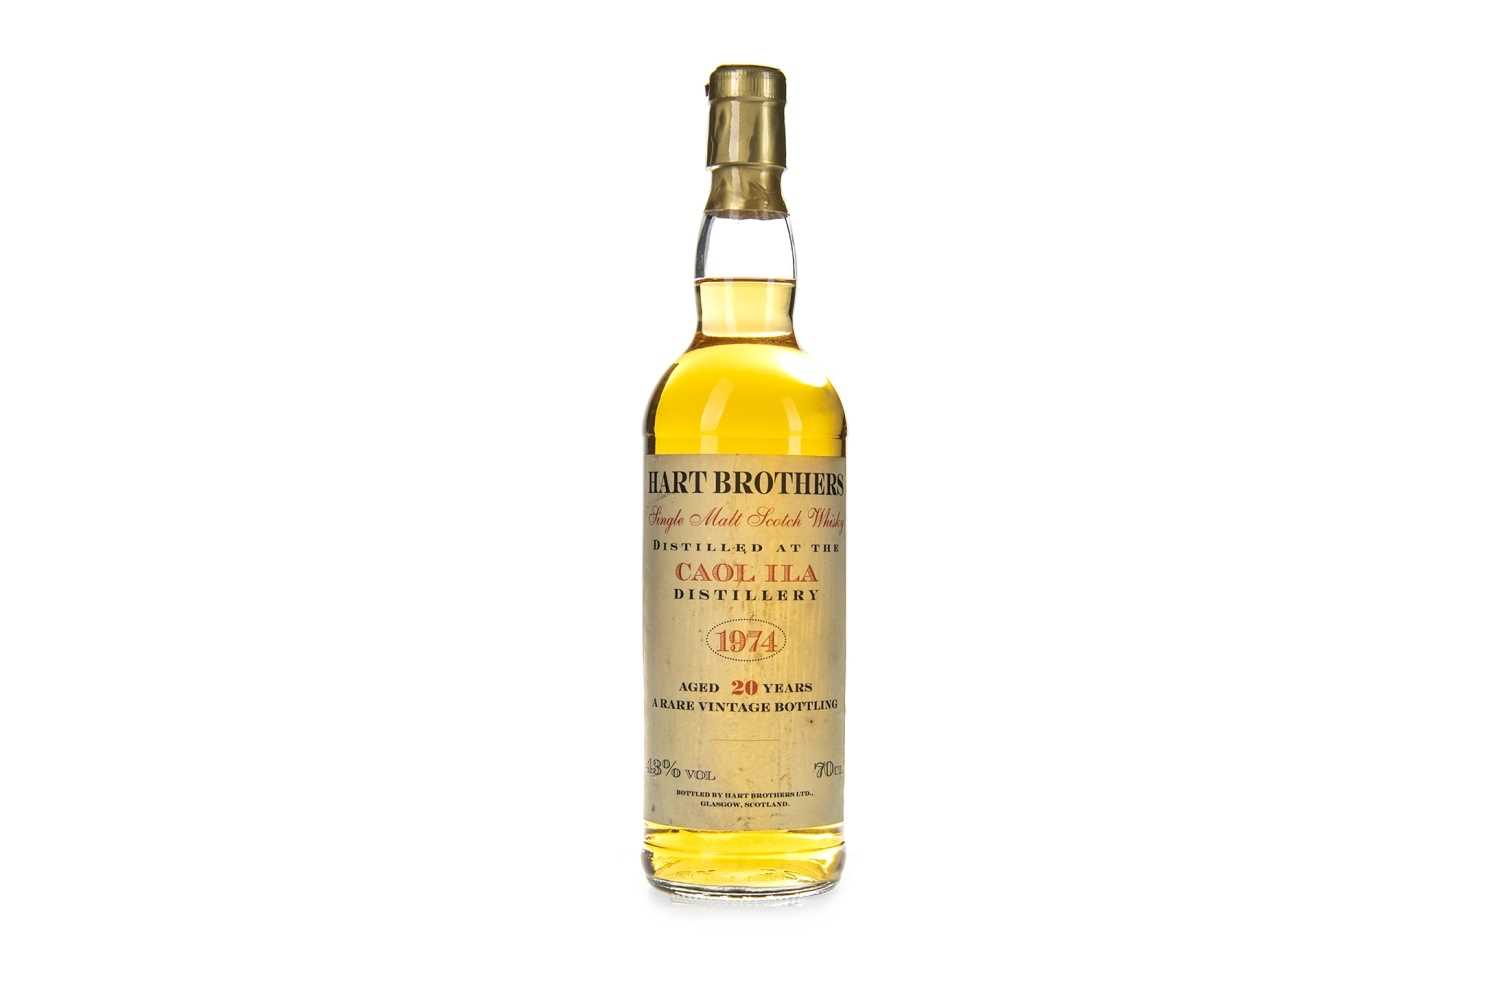 Lot 16 - CAOL ILA 1974 HART BROTHER'S AGED 20 YEARS